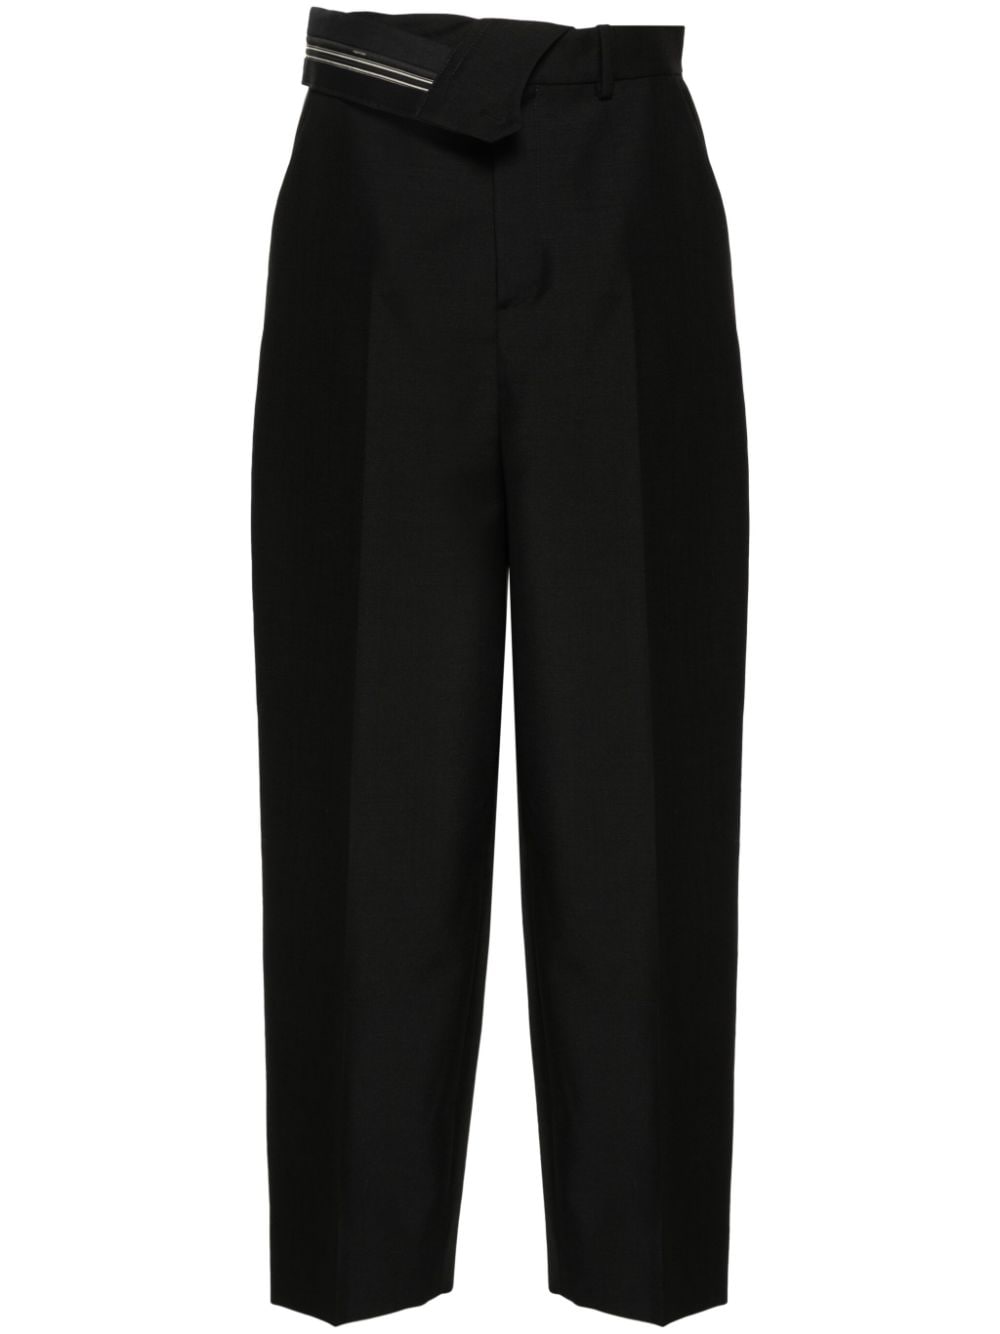 FENDI Black Wool Trousers with Asymmetric Waist and Overlapping Panel for Women